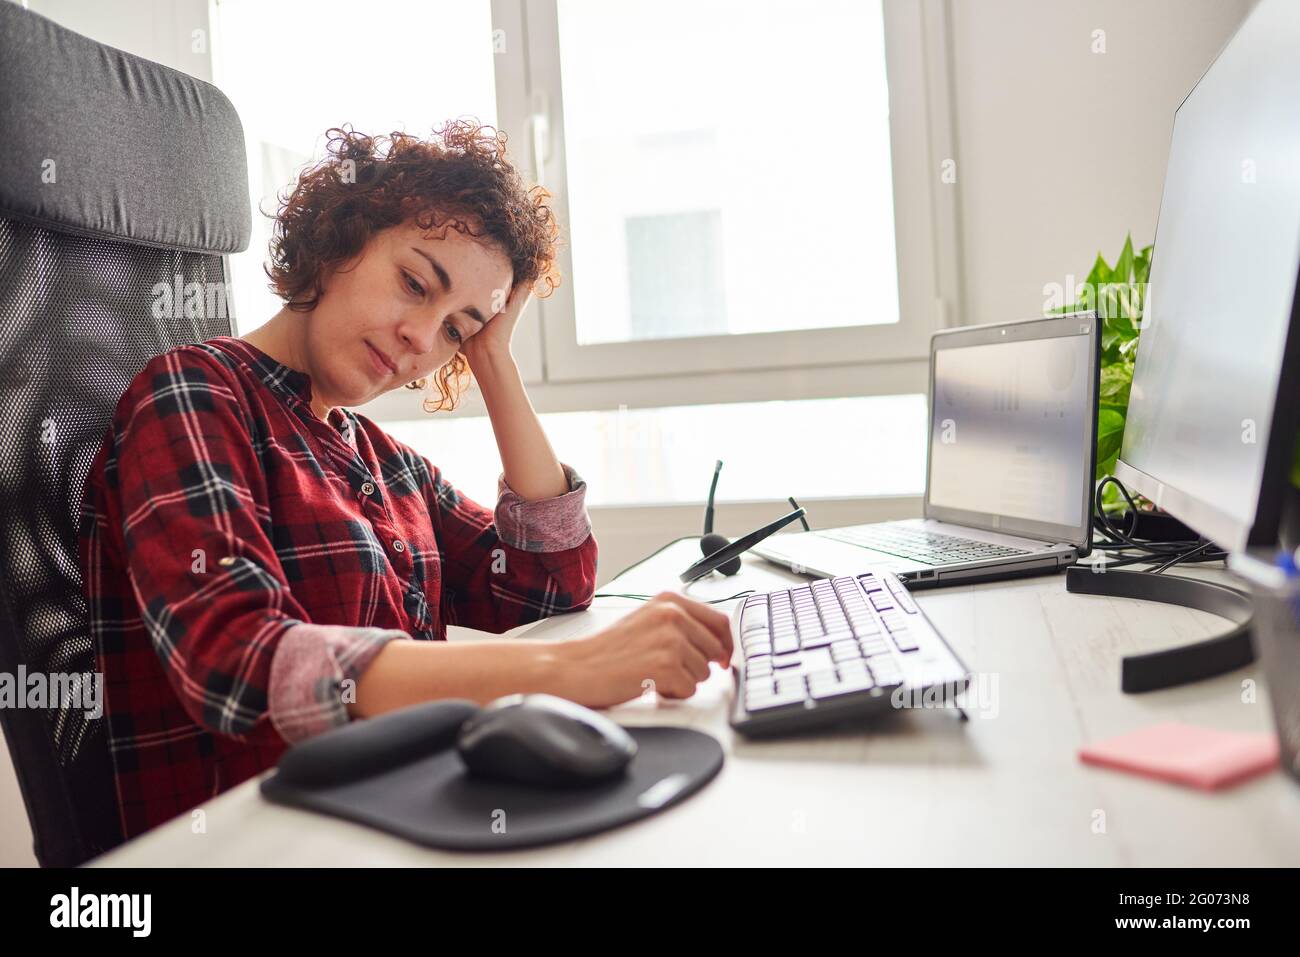 Woman tired of working in front of the computer rests her head on her hand Stock Photo